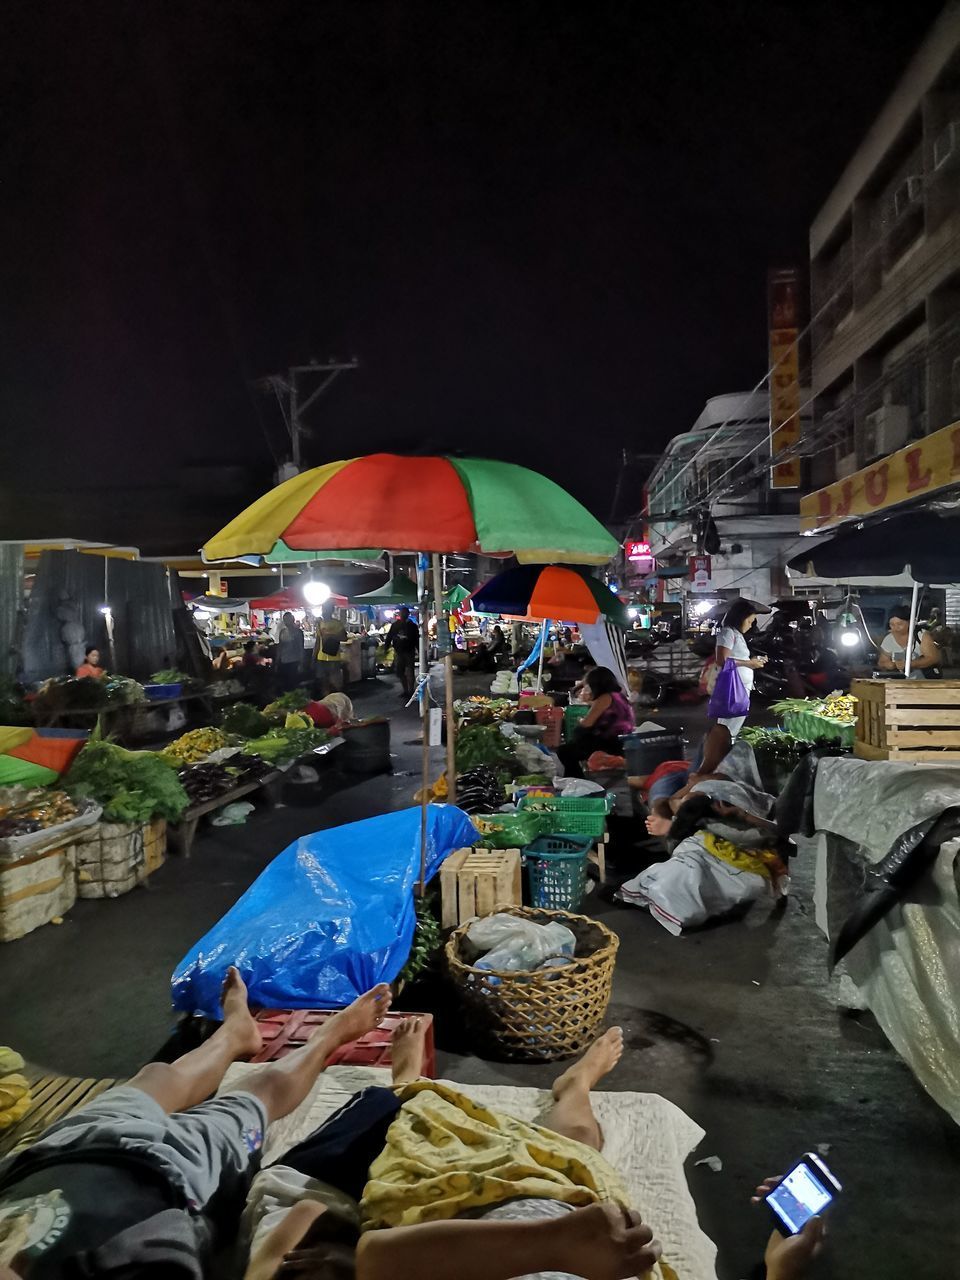 PEOPLE IN MARKET STALL AT NIGHT